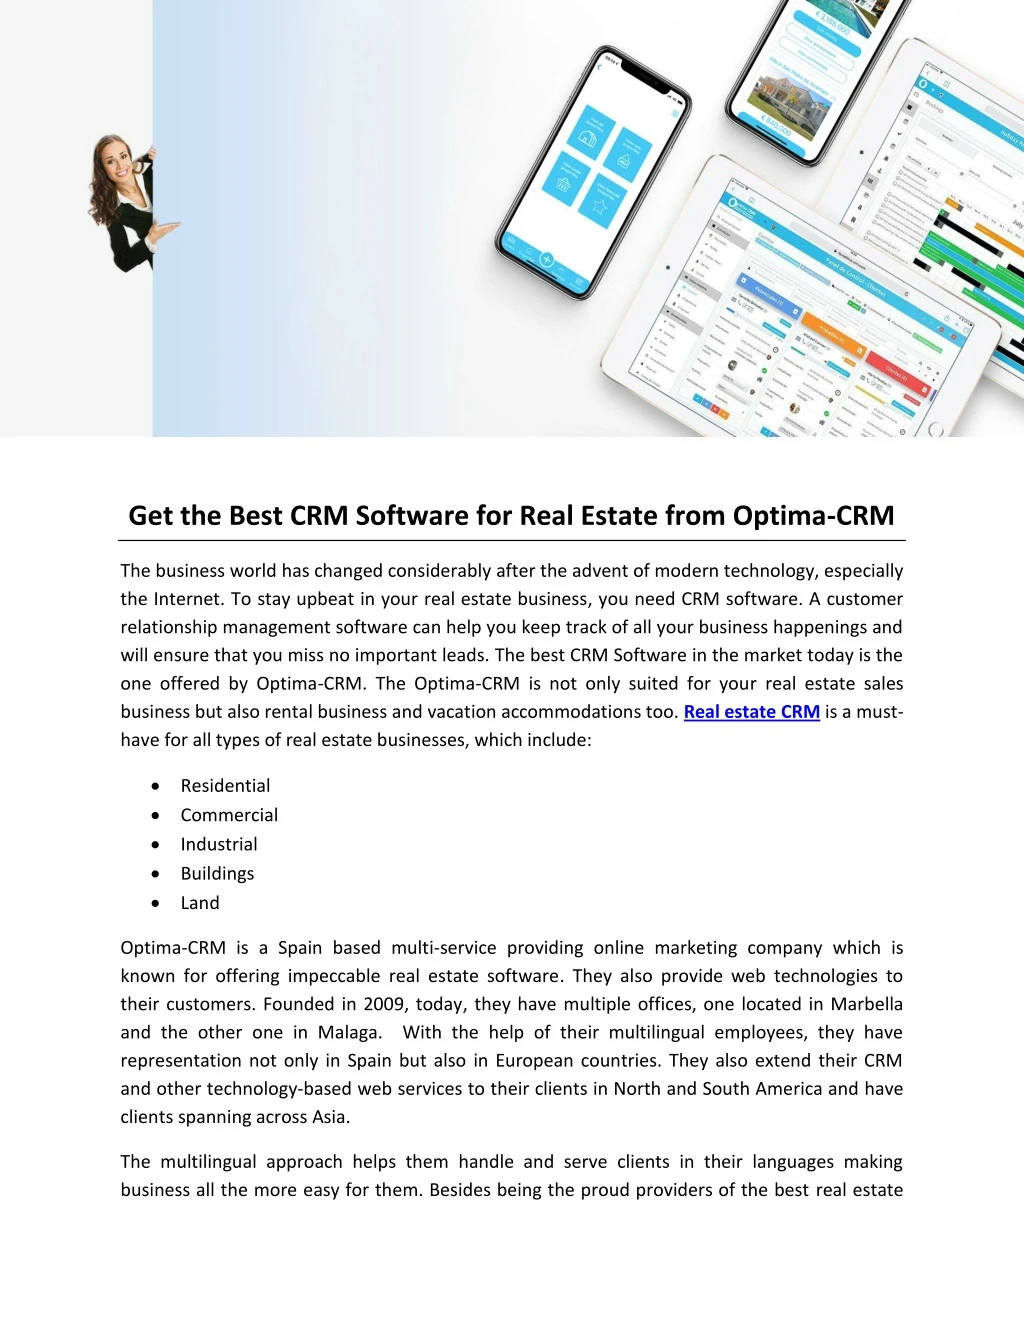 get the best crm software for real estate from